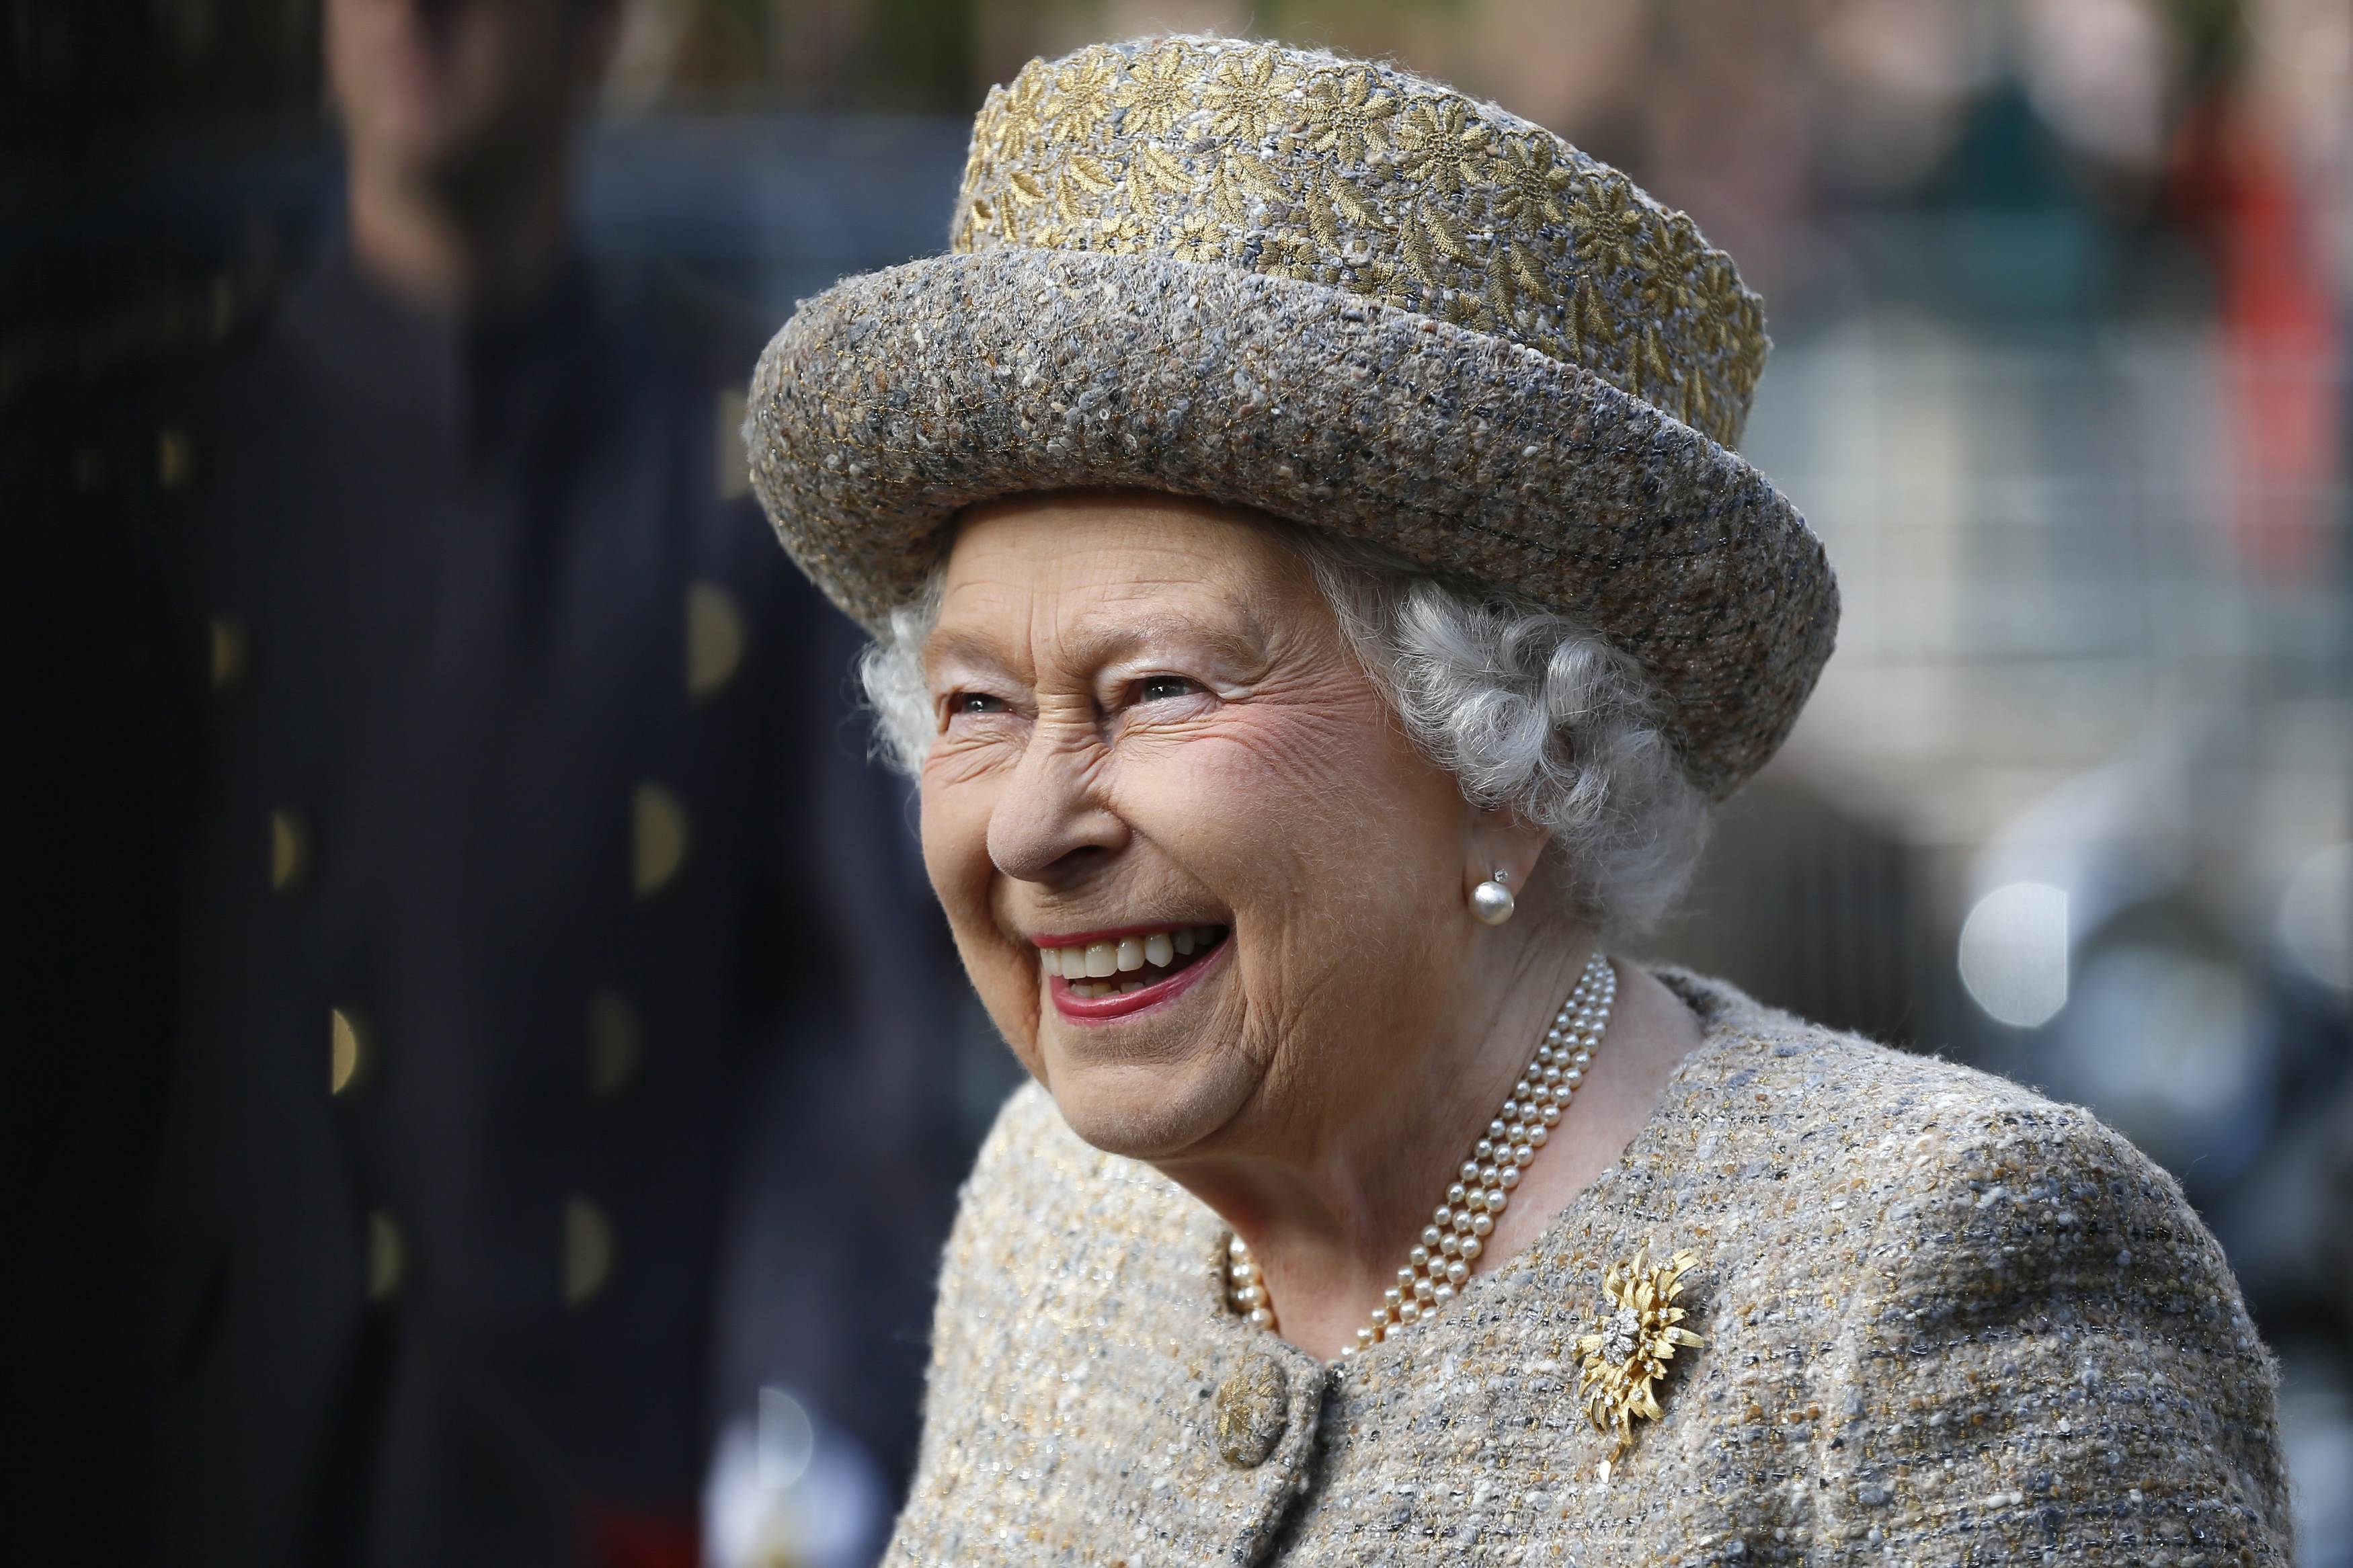 Queen Elizabeth II smiles as she arrives before the opening of the Flanders' Fields Memorial Garden at Wellington Barracks on November 6, 2014, in London, England. | Source: Getty Images